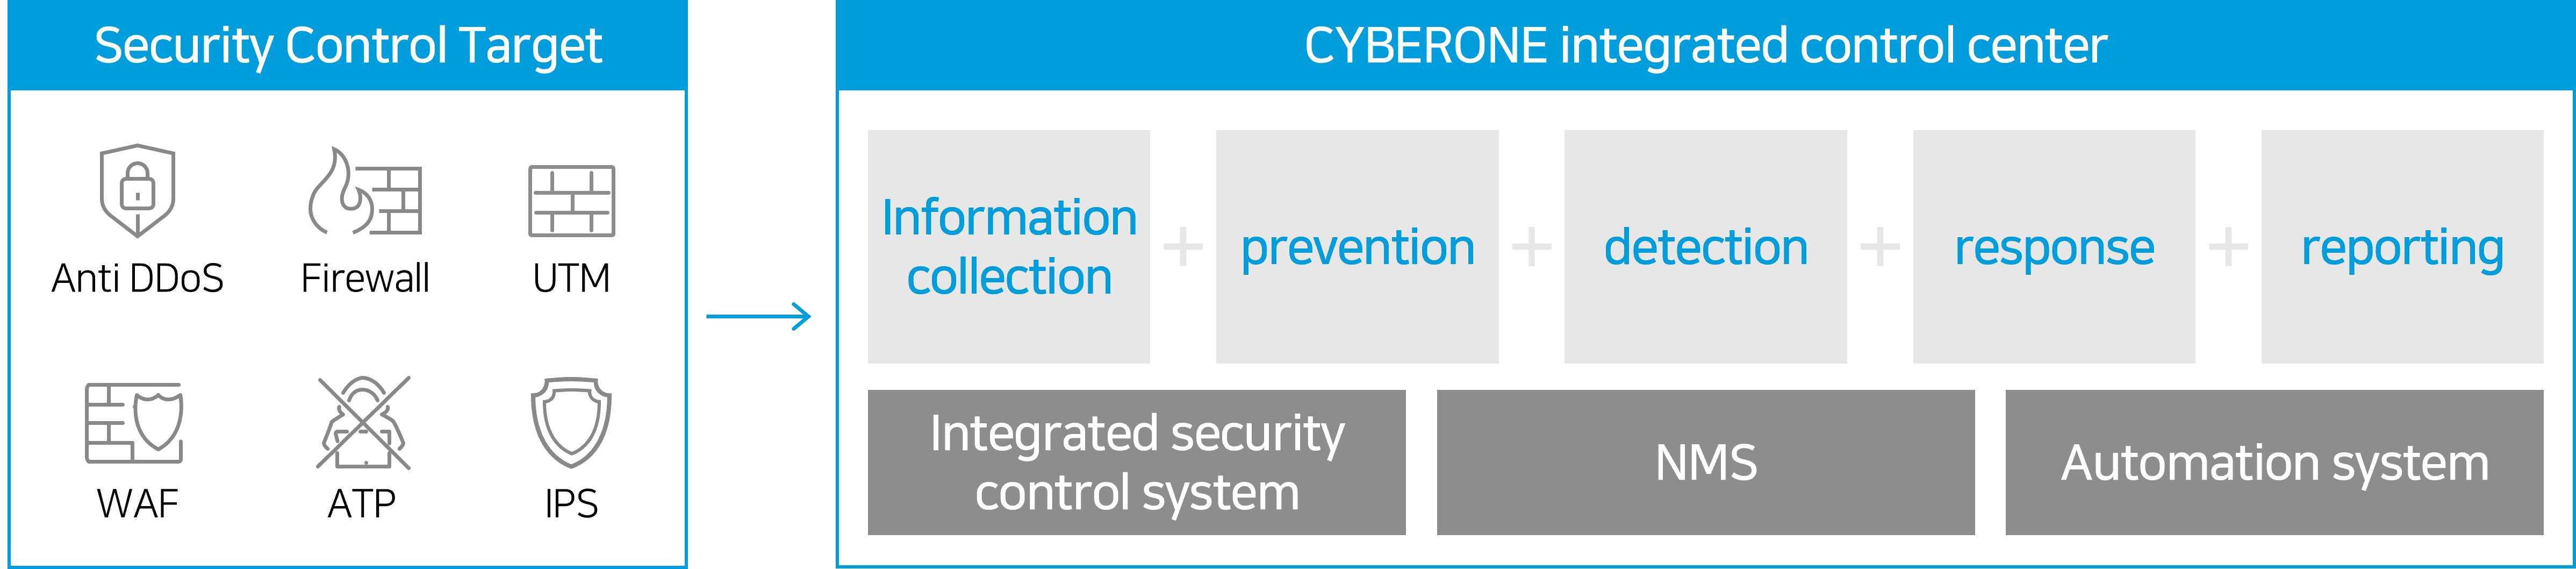 Security control target - Anti DDos, Firewall, UTM, WAF, ATP, IPS / Cyberone integrated control center - information collection + prevention + detection + response + report